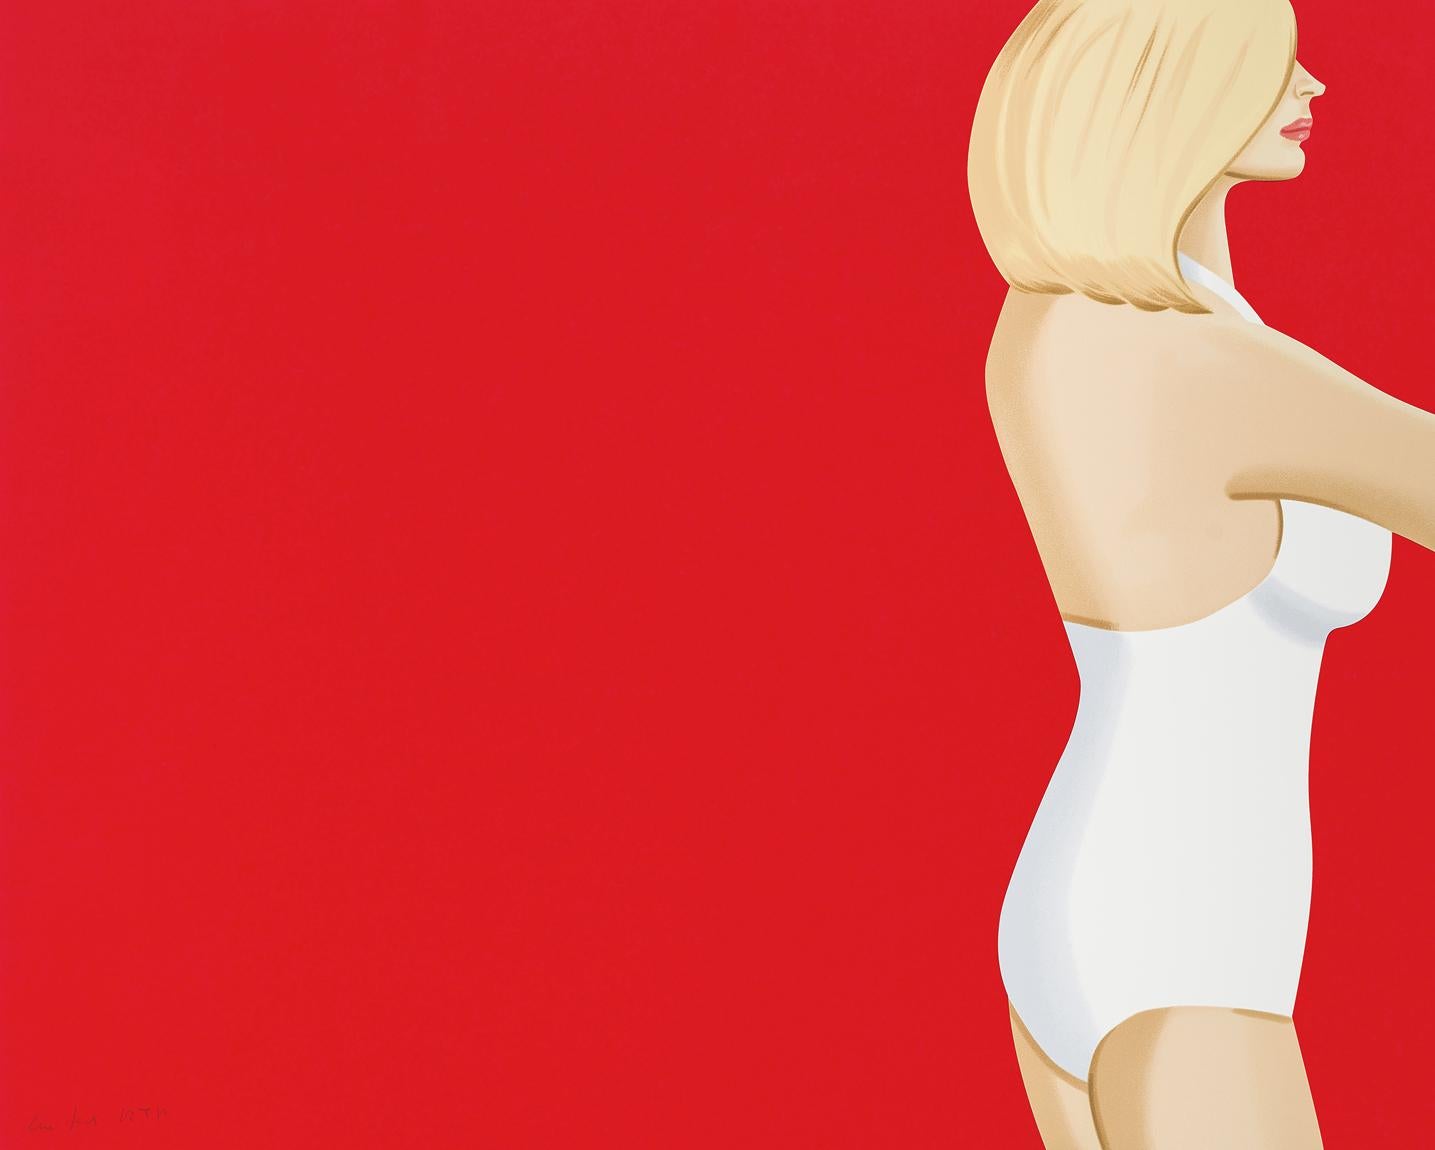 "Coca-Cola Girl 3" is one out of Alex Katz's Coca-Cola Girl series. These figures bare witness of his deep engagement with the ideas of advertisment, figurative art and how to come to a high form of abstraction in form as well as in colour. Edition